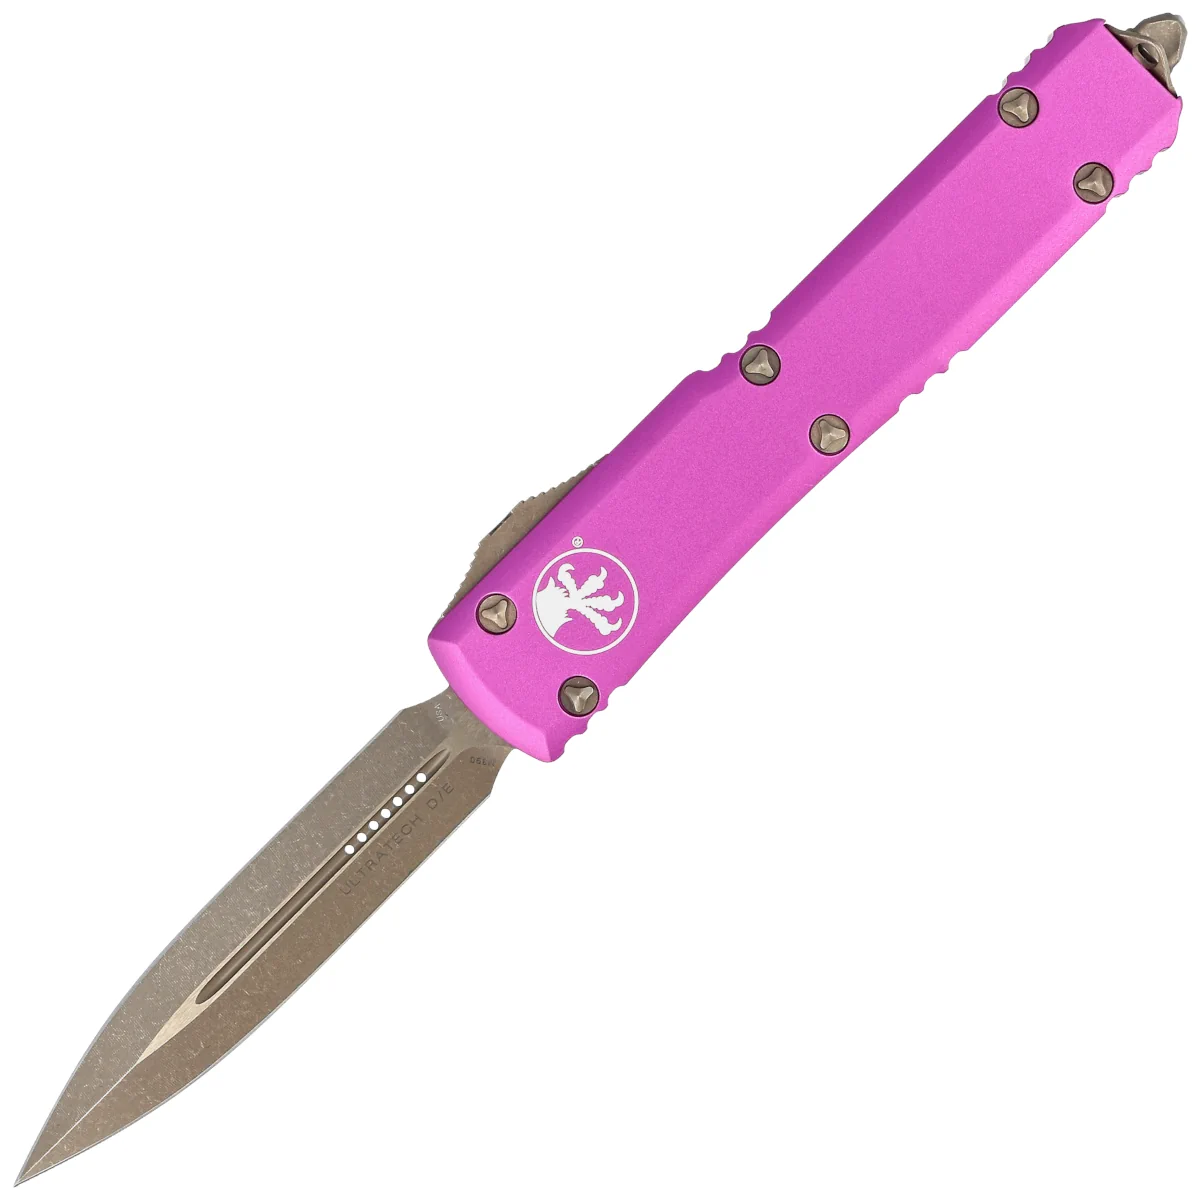 Microtech Ultratech D/E Violet Aluminium, Bronzed Apocalyptic M390 by Tony Marfione (122-13APVI)